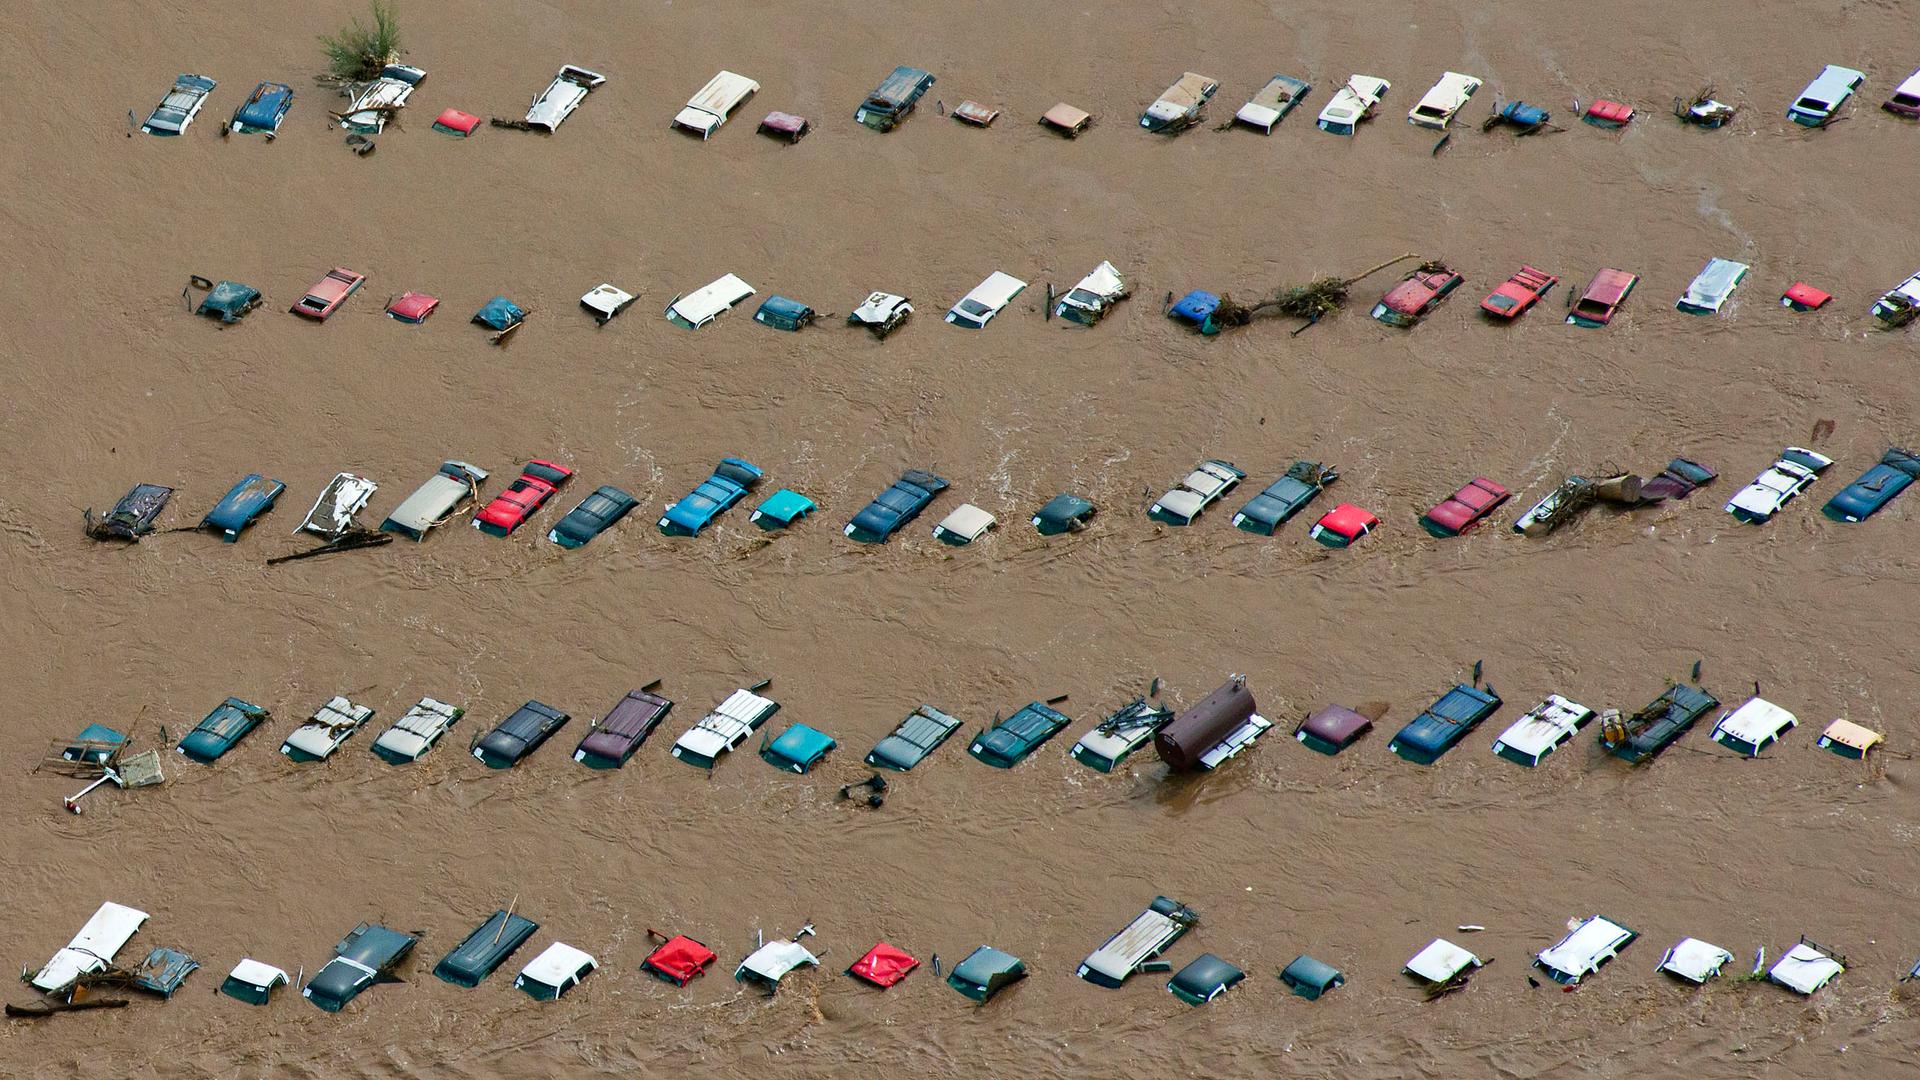 Vehicles submerged in flood waters along the South Platte River near Greenley, Colorado in 2013. Scientists believe climate change is already bringing more flooding to river corridors and coastal areas around the world.